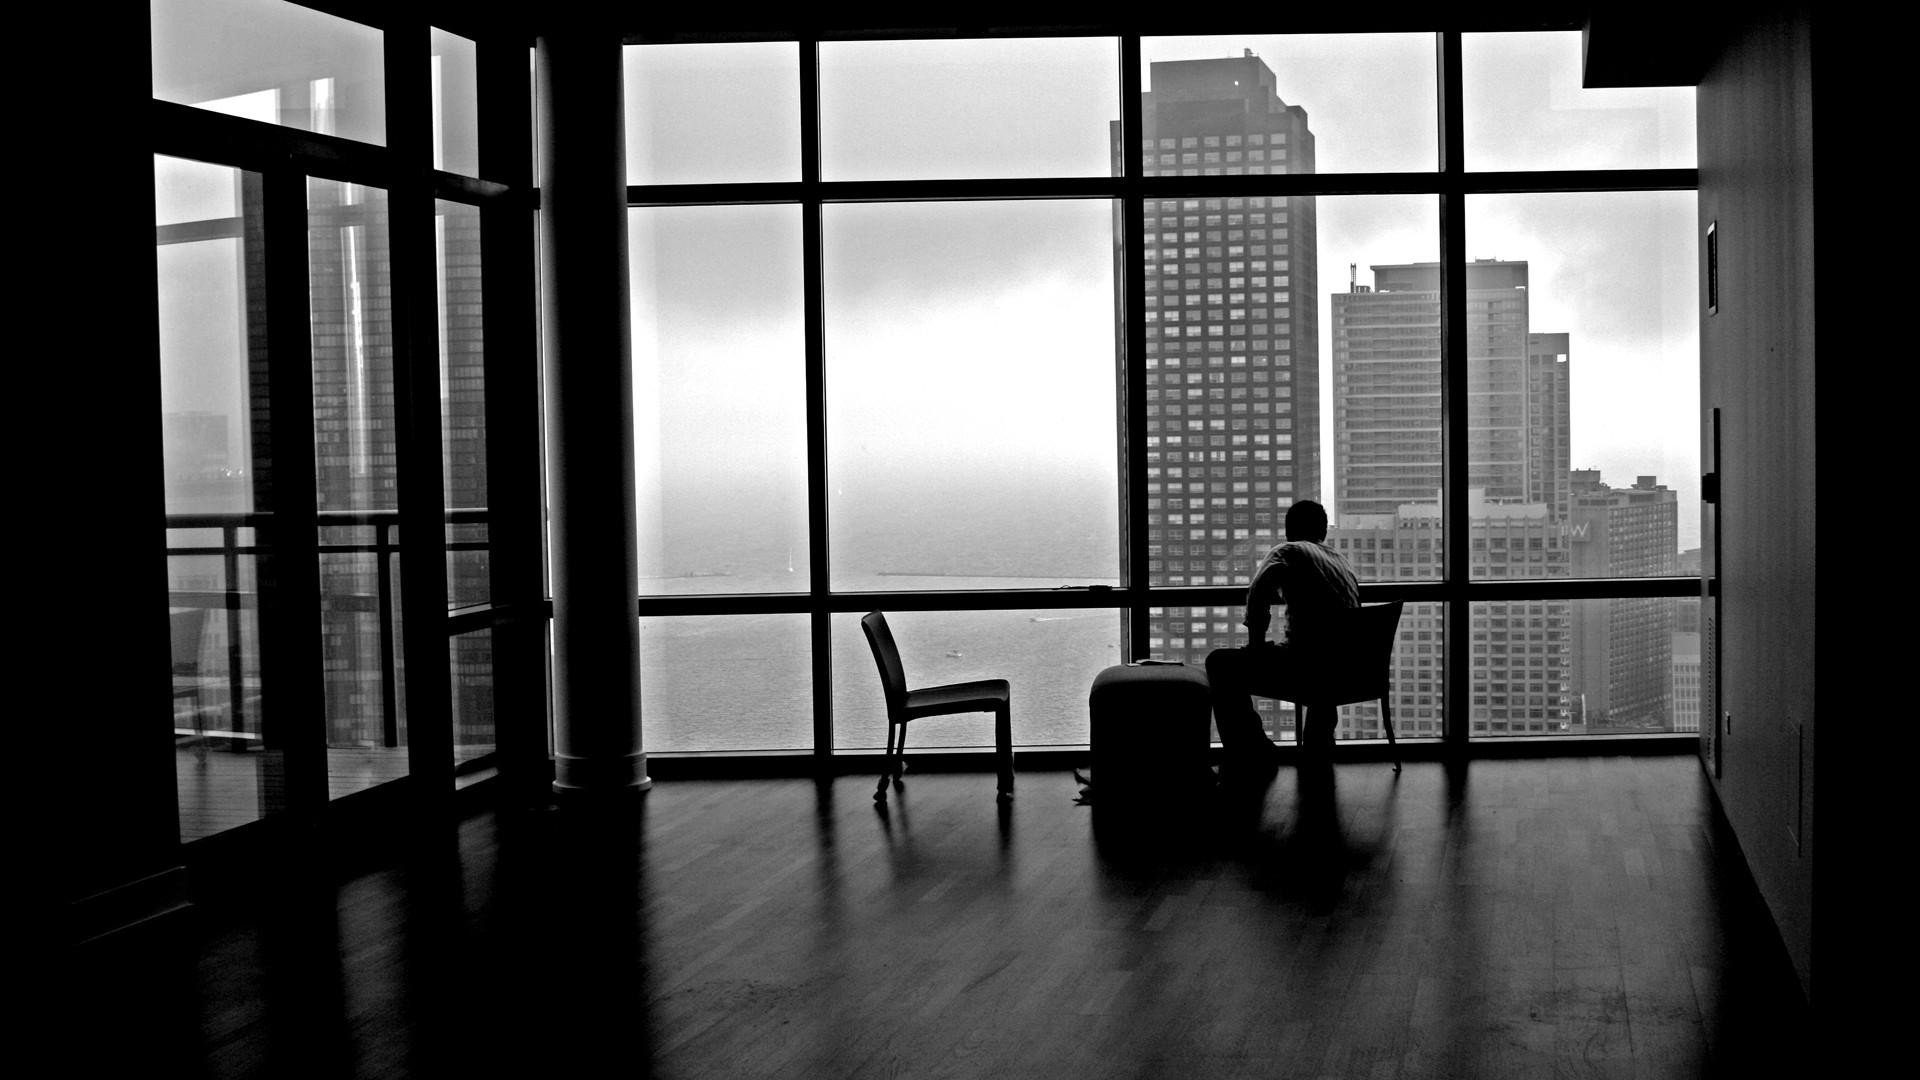 General 1920x1080 urban city room indoors monochrome men men indoors looking out window chair sitting